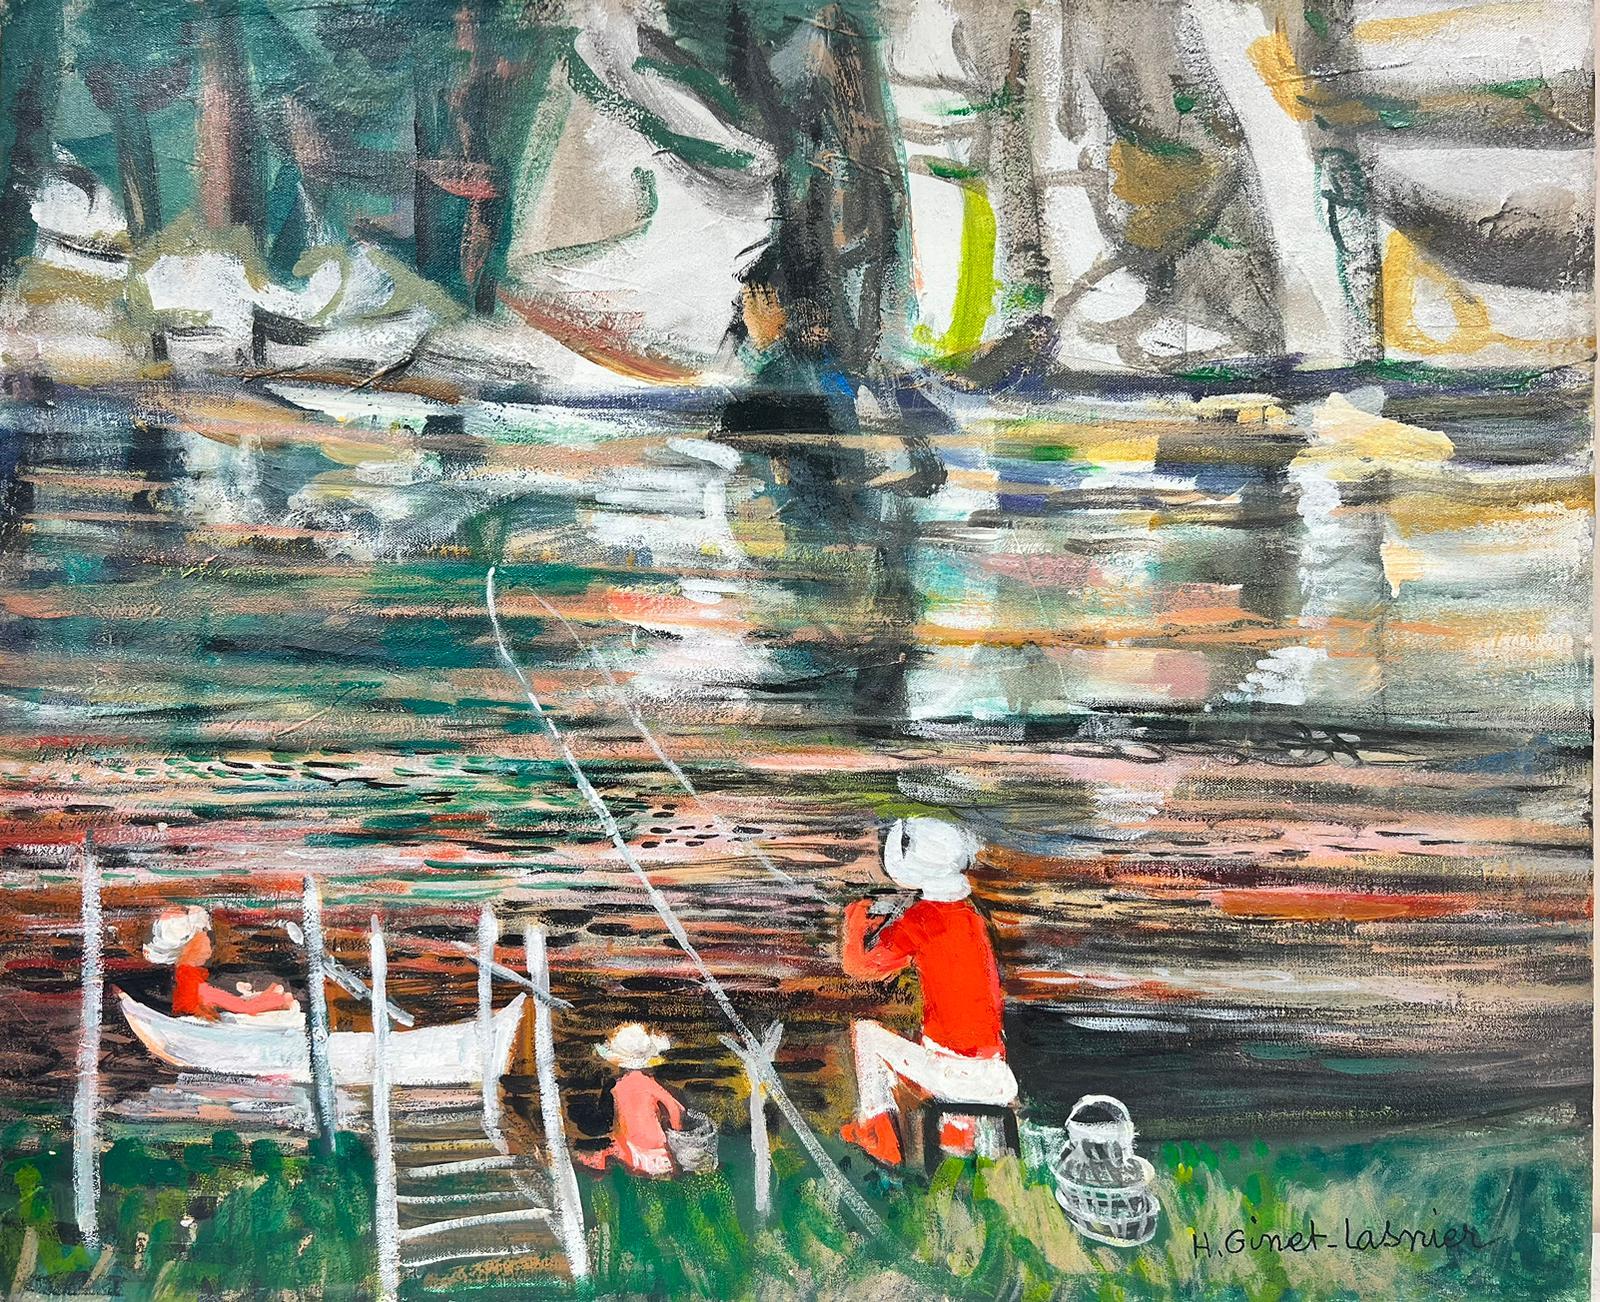 Huguette Ginet-Lasnier  Figurative Painting - Figures on River French Modernist Signed Oil Painting Fishing Vacation